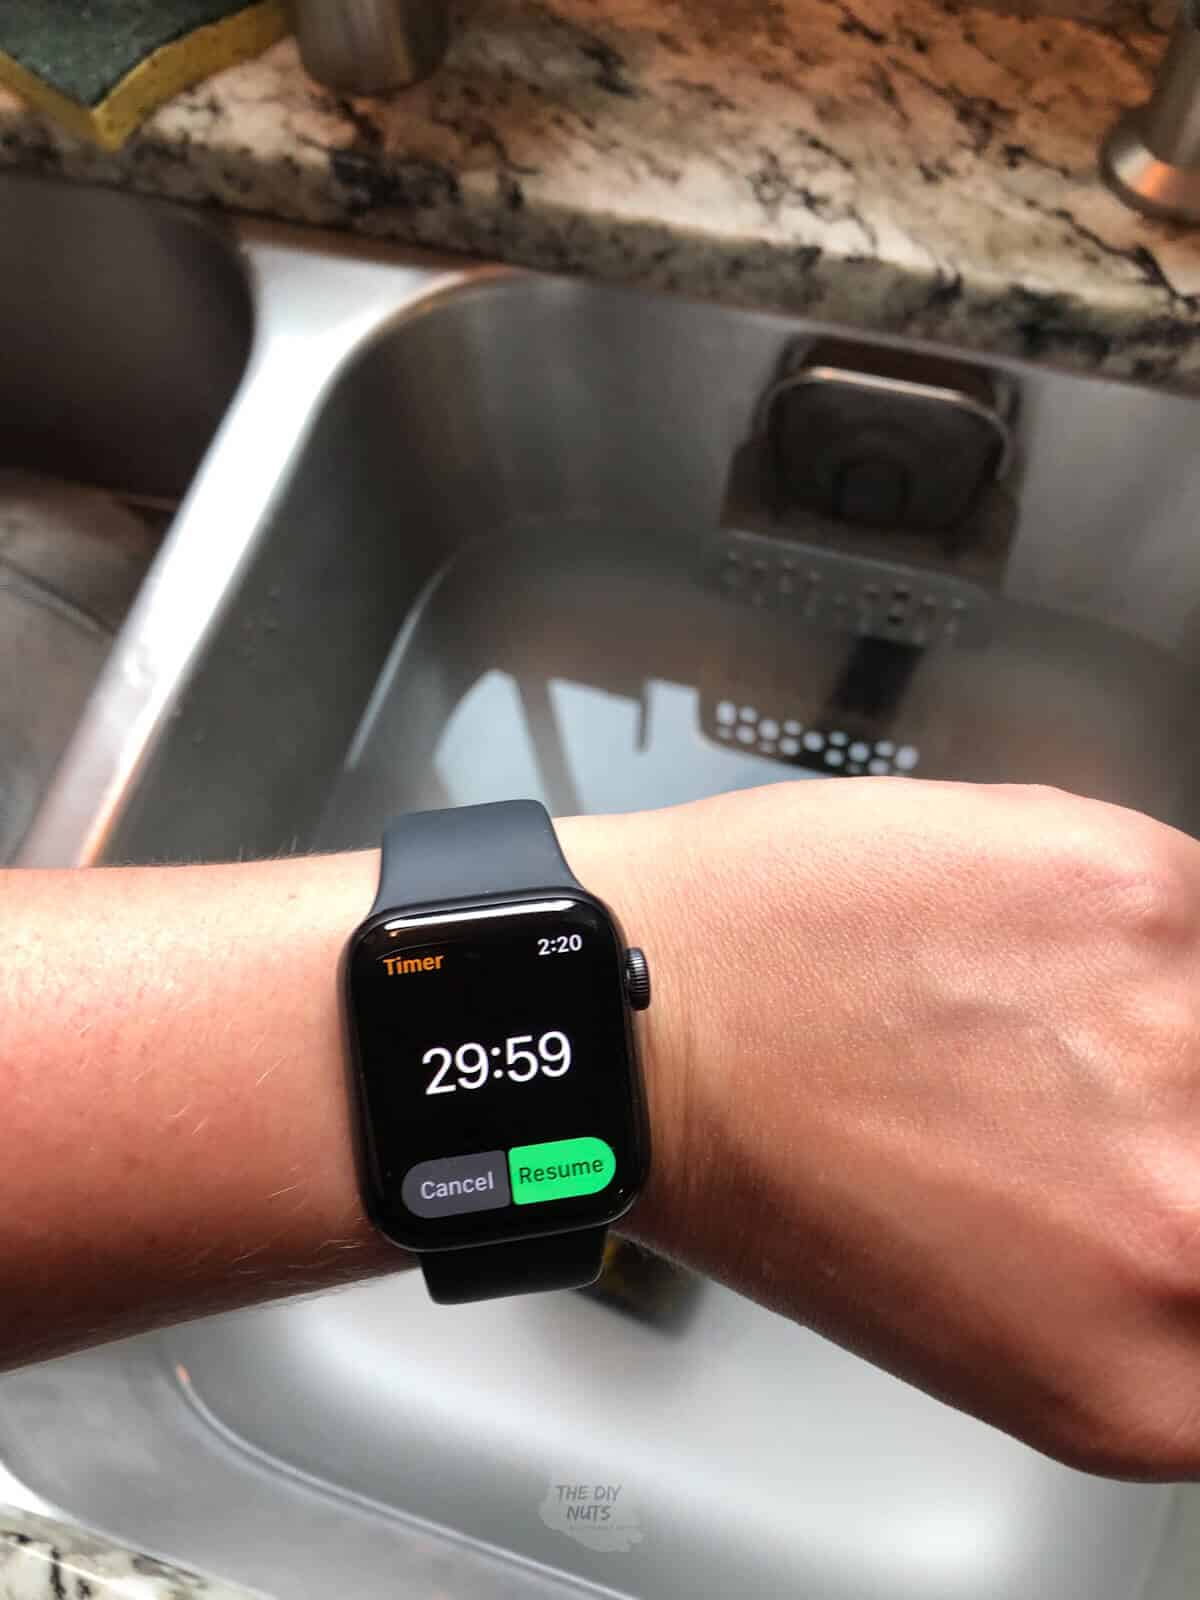 apple watch setting a 30 minute timer on wrist